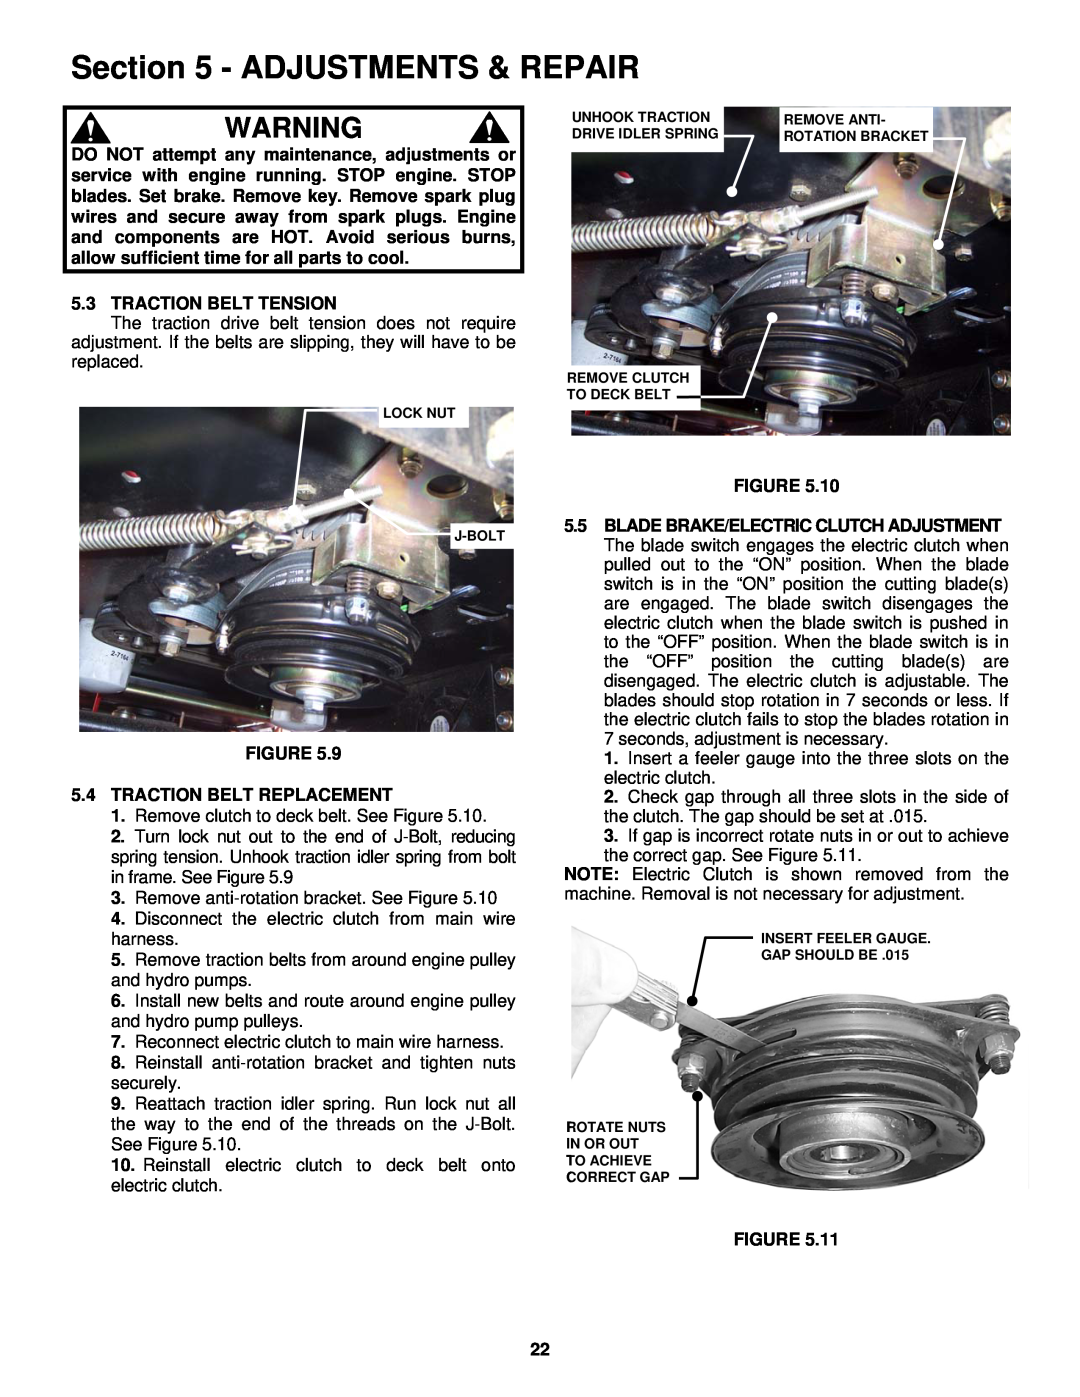 Snapper NZM19482KWV, NZM21522KWV, NZM25612KWV, NZM27612KH important safety instructions Adjustments & Repair 